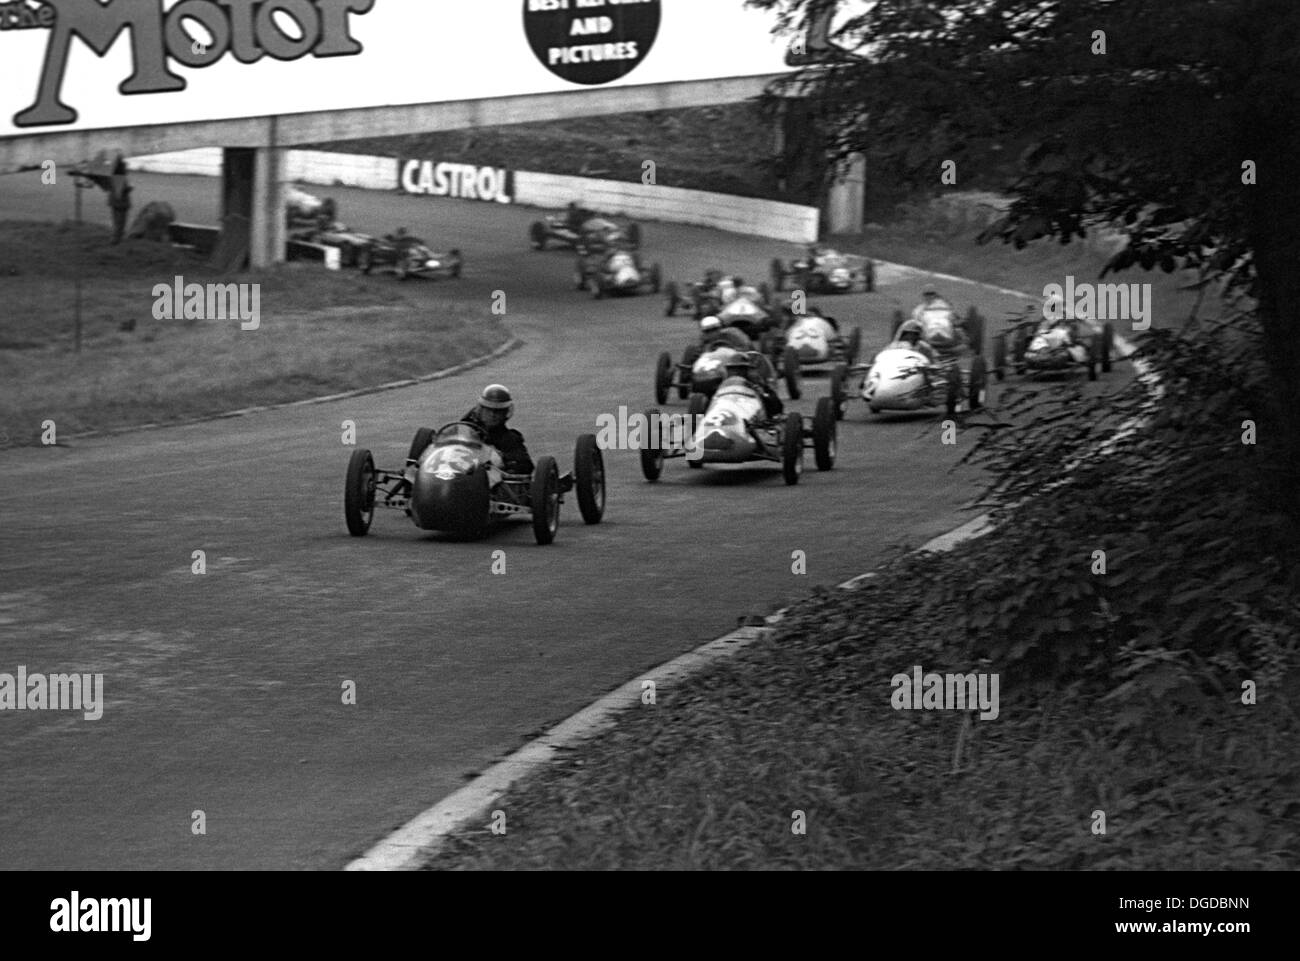 A Kieft leads Coopers in a 500cc Formula 3 race, Crystal Palace, England, 19th September 1953. Stock Photo